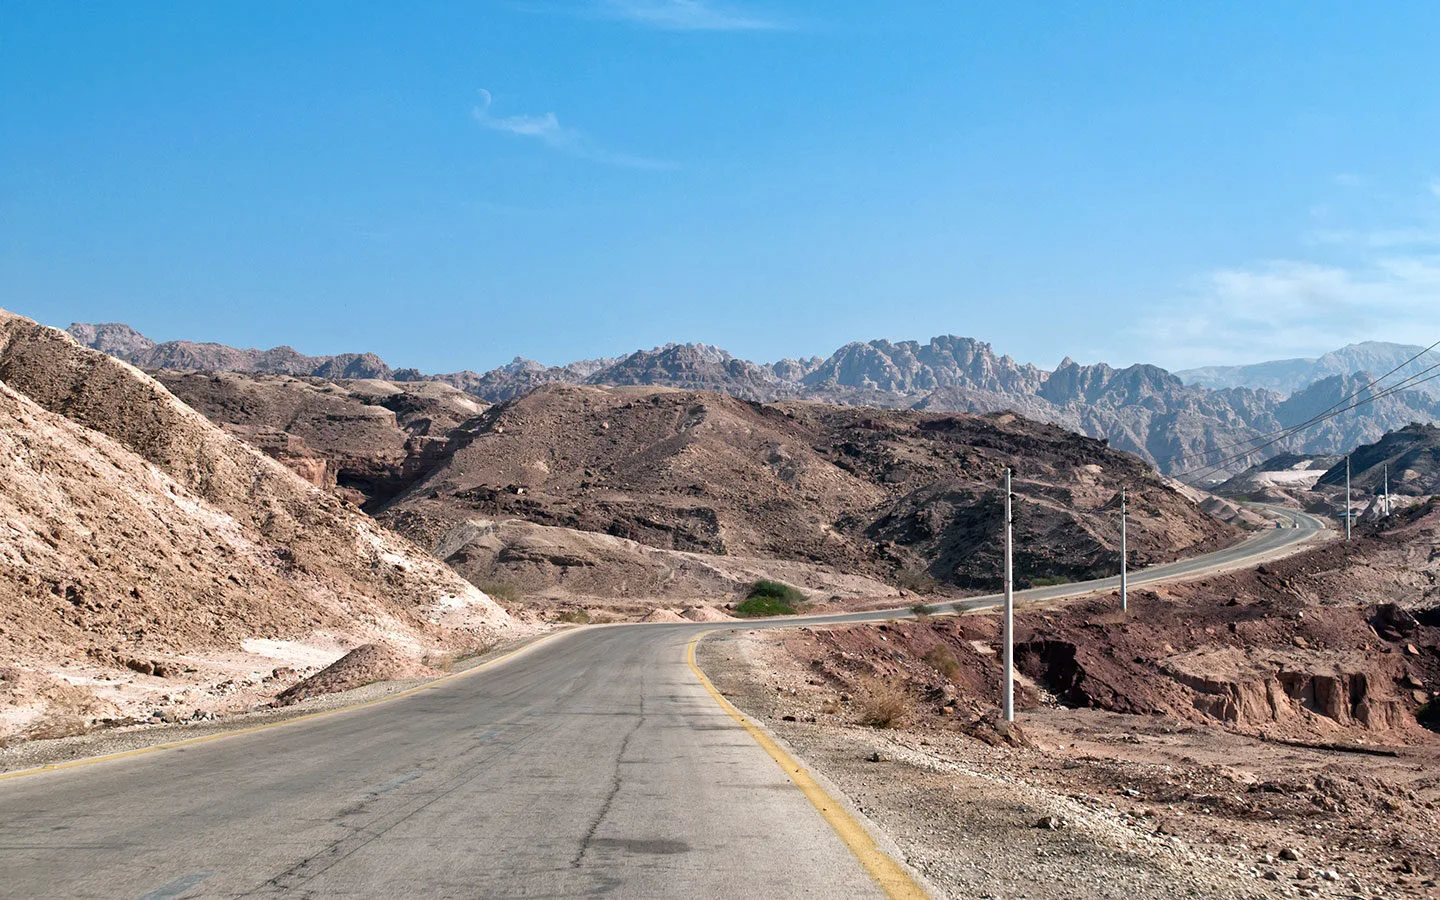 Driving on the King's Highway in Jordan